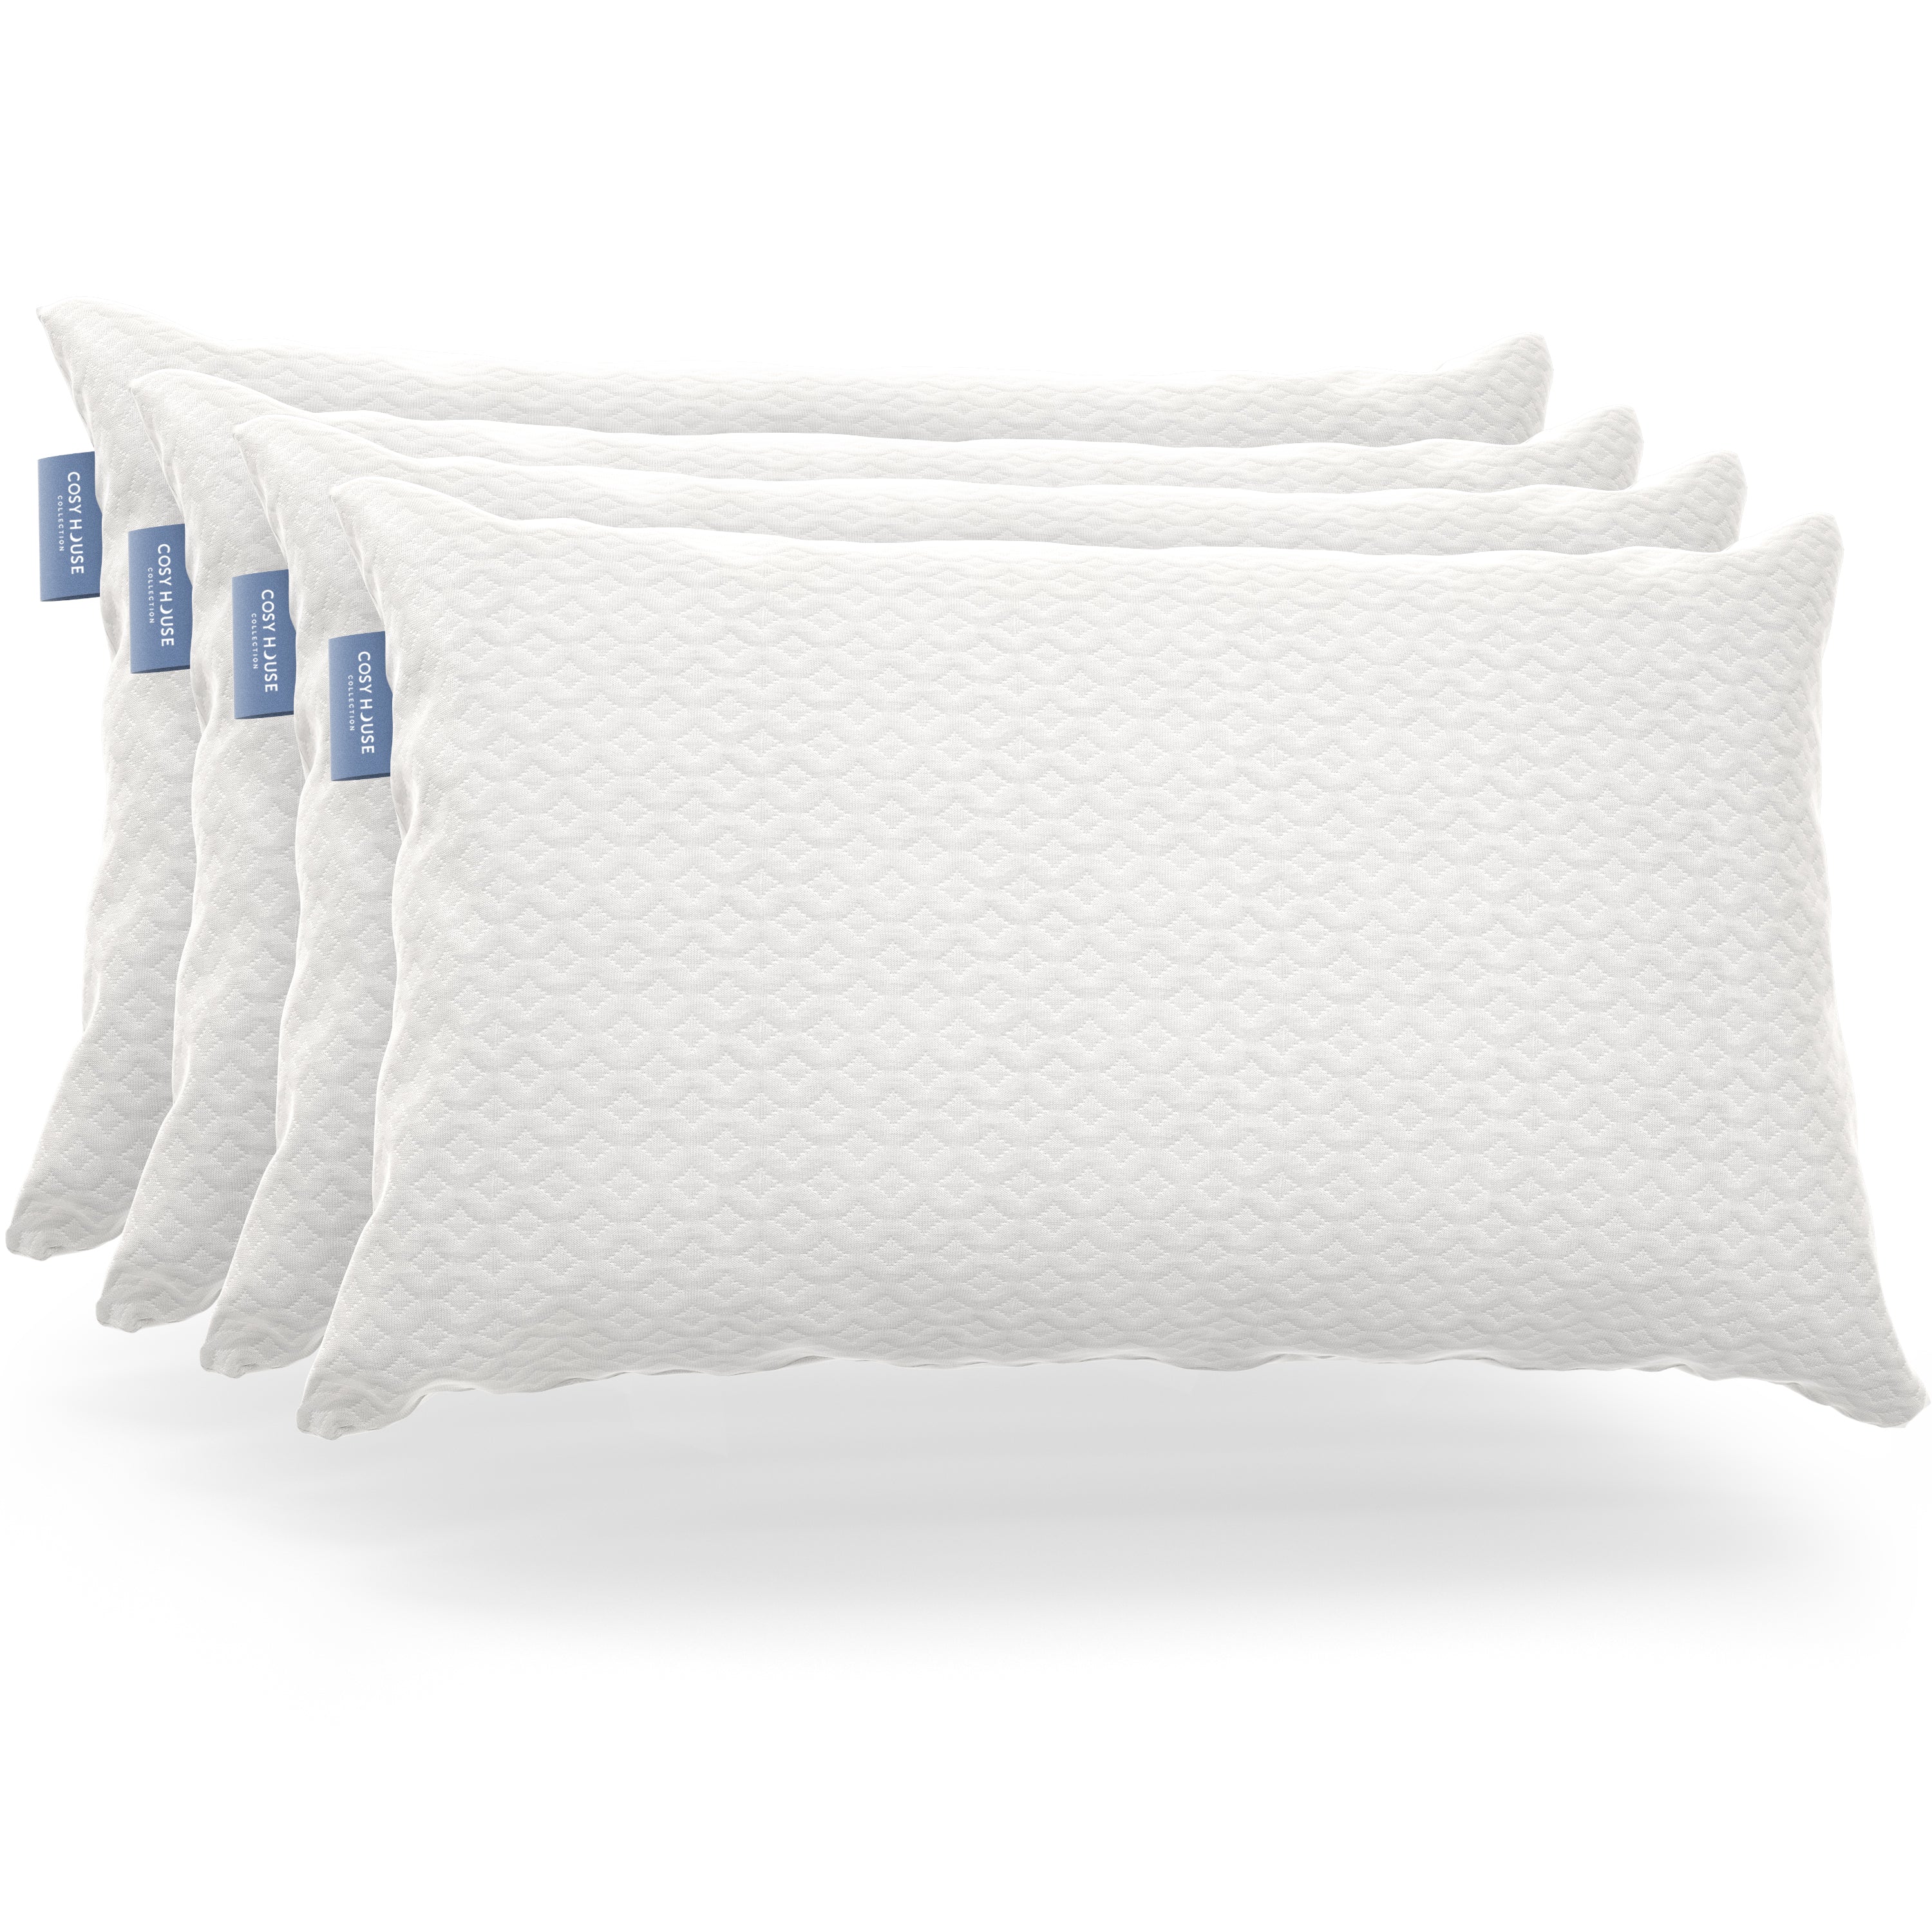 Queen Size 4 Pack Pillow Inserts, Pillows for Sleeping 4 Pack, Hotel Pillows  for Side Back & Stomach Sleepers, Washable Bed Pillows Set of 4 